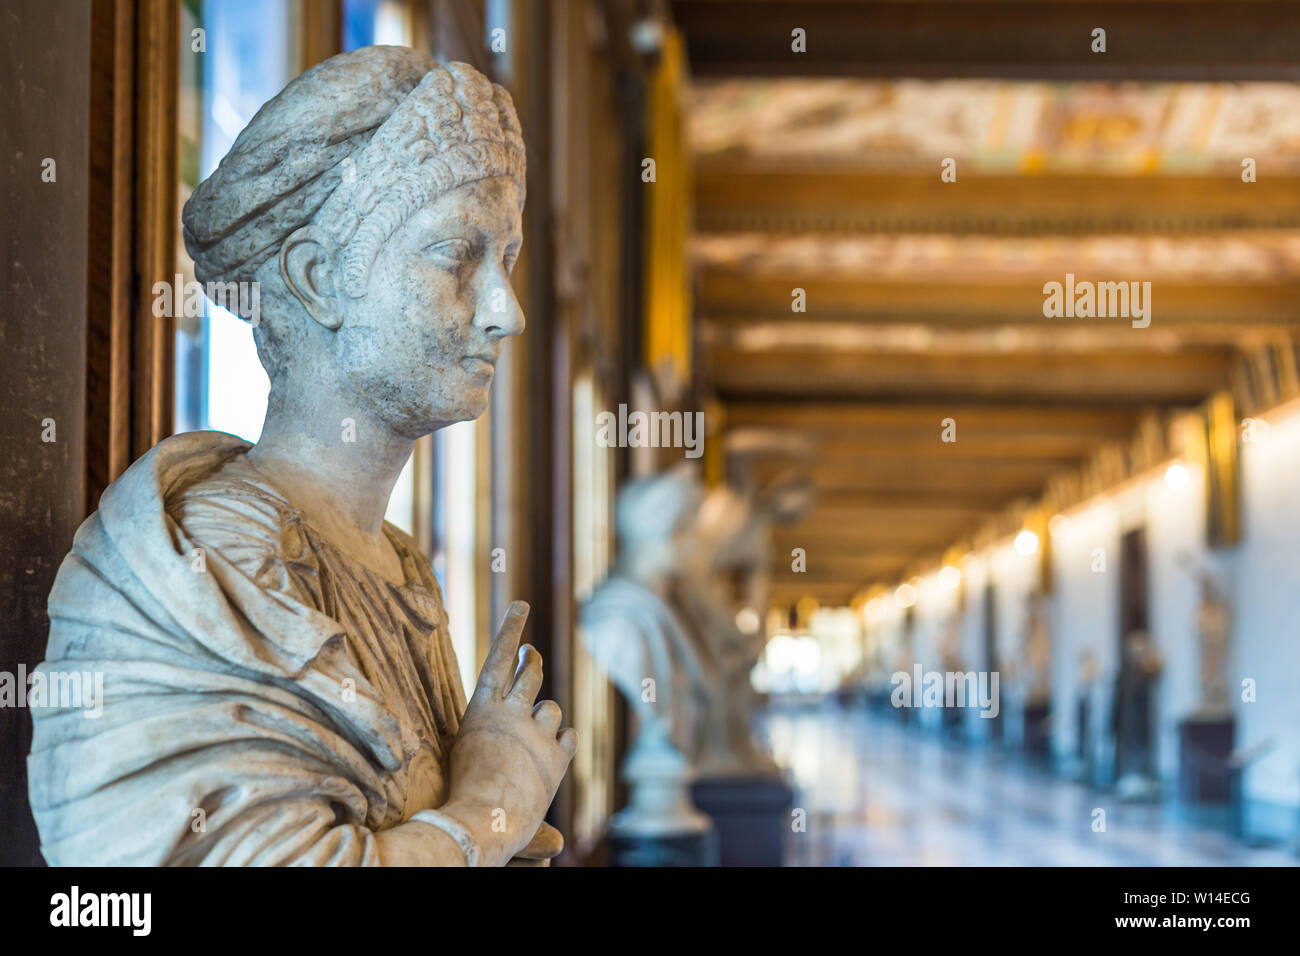 Florence, Italy - September 25, 2016: Statue in the hallway of Uffizi Gallery, one of the oldest and most famous art museums of Europe. Stock Photo